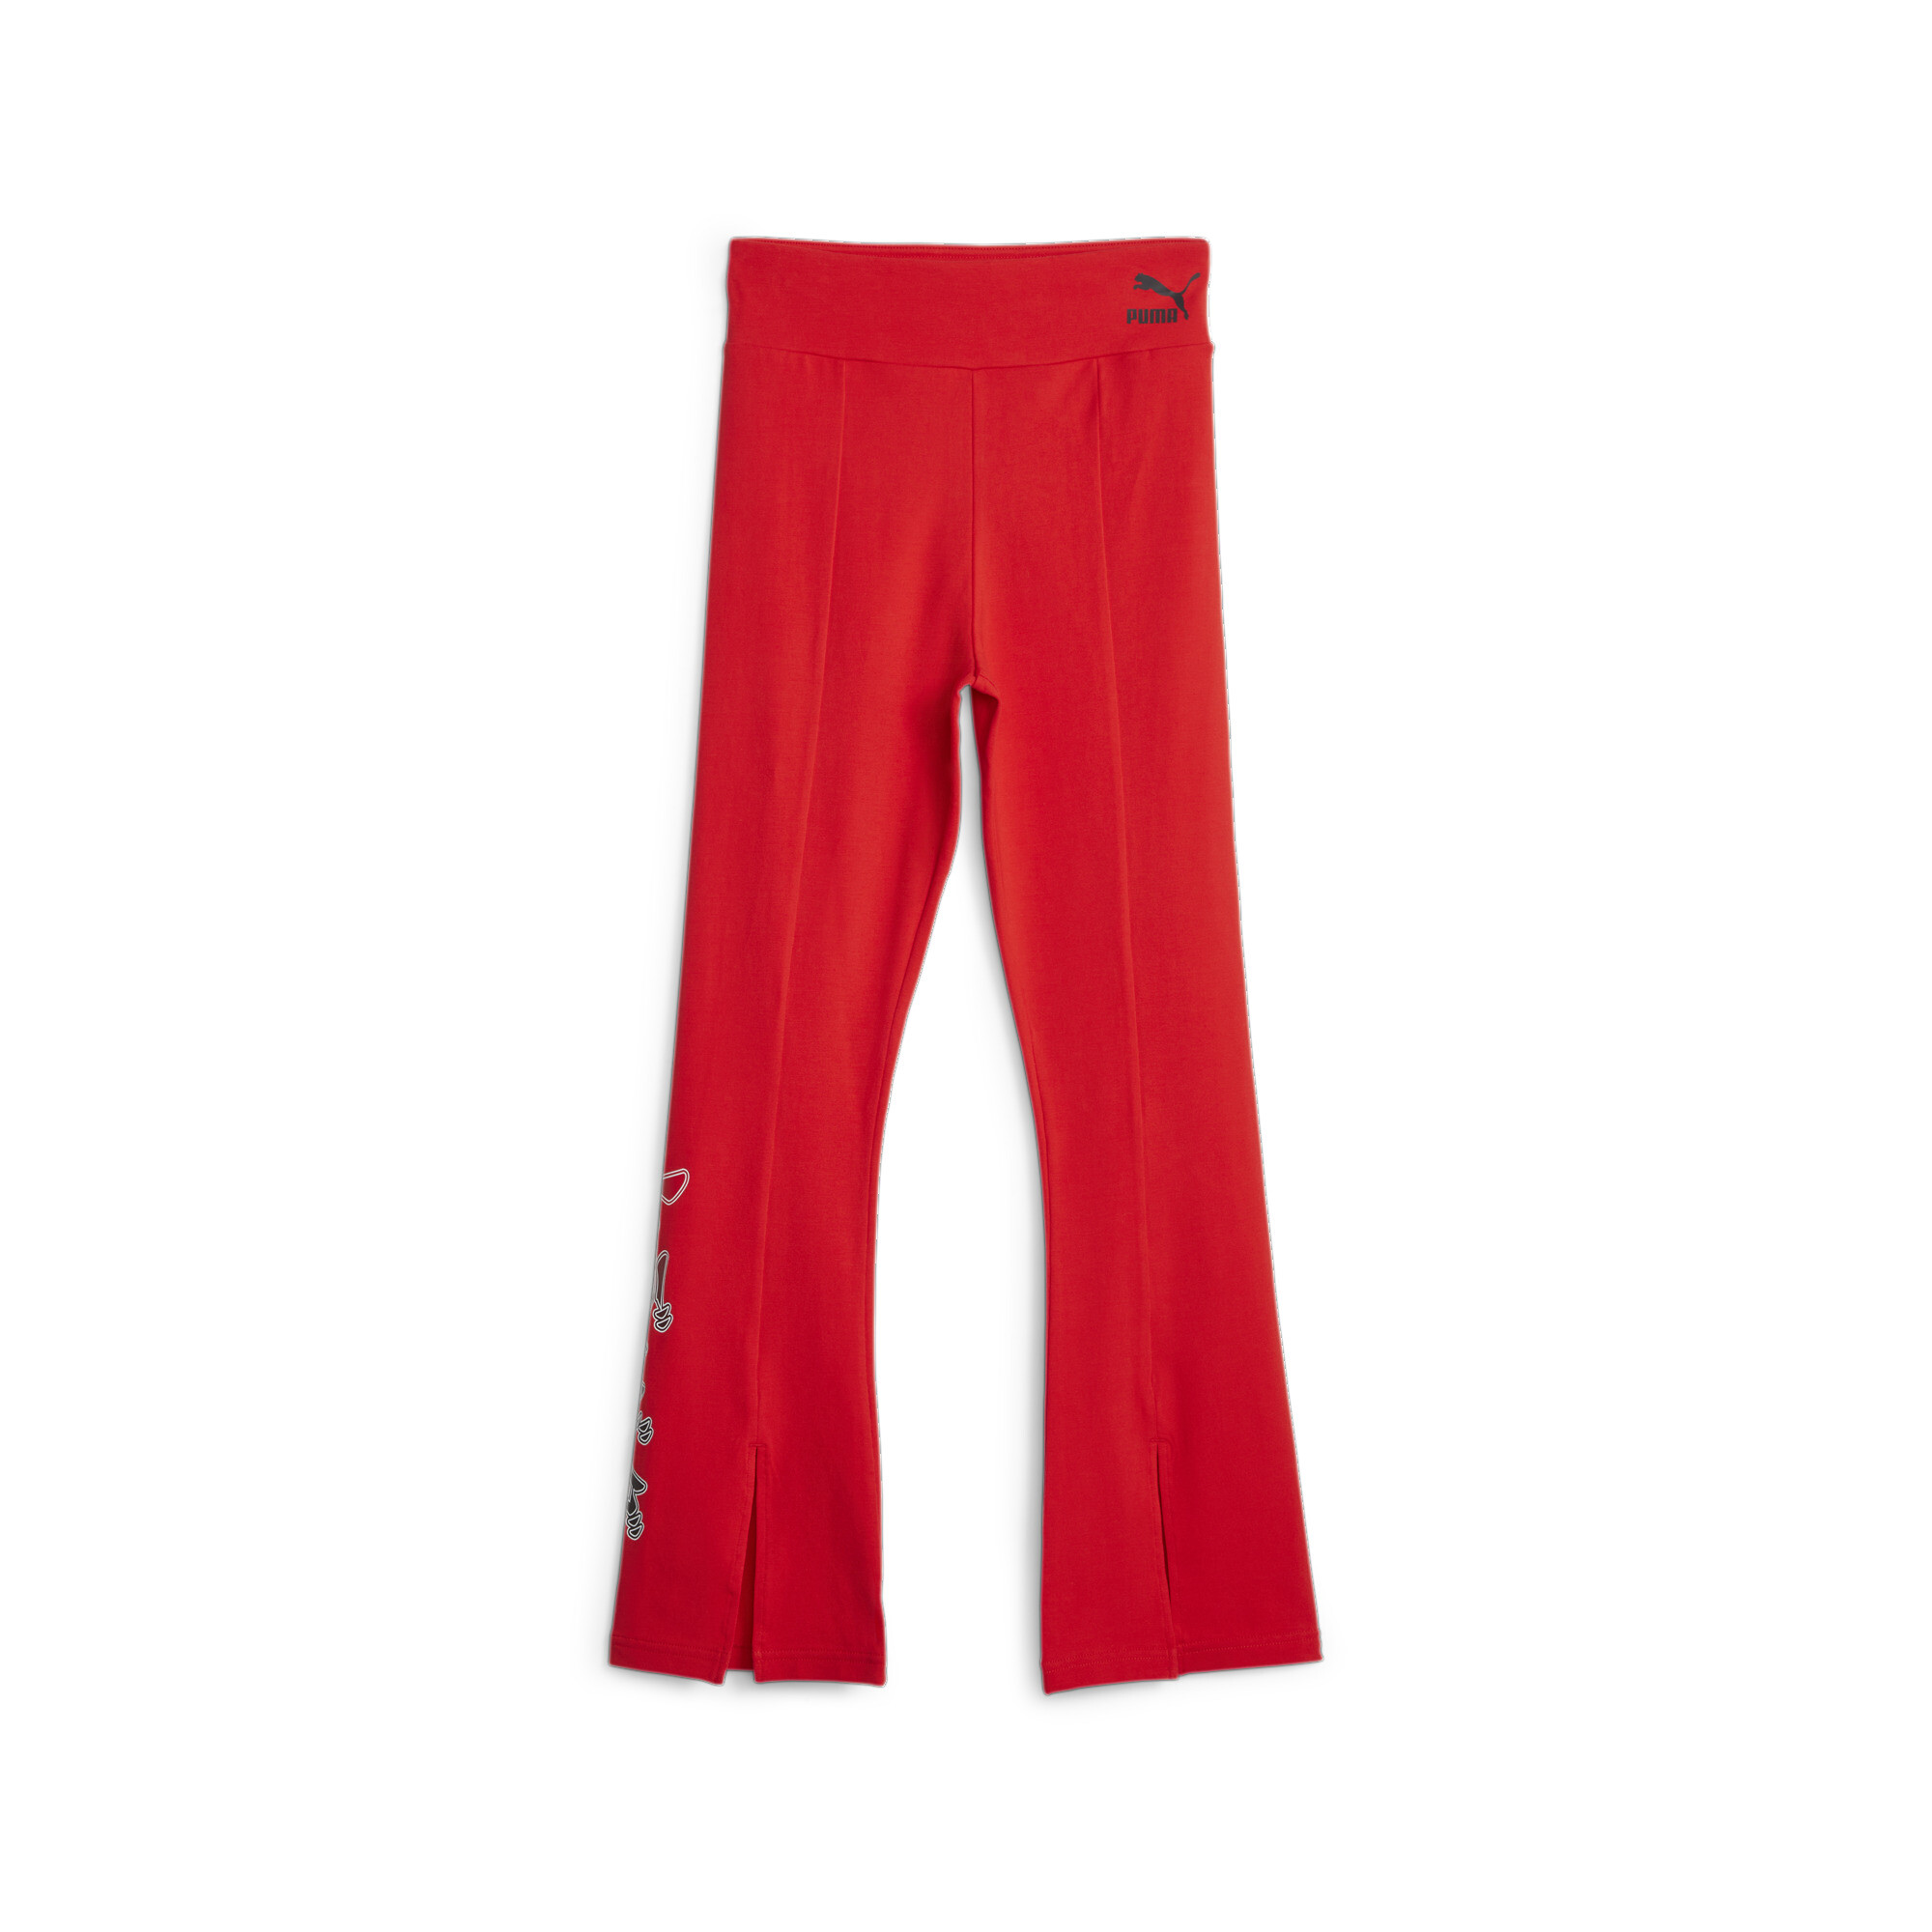 PUMA X MIRACULOUS Leggings In Red, Size 9-10 Youth